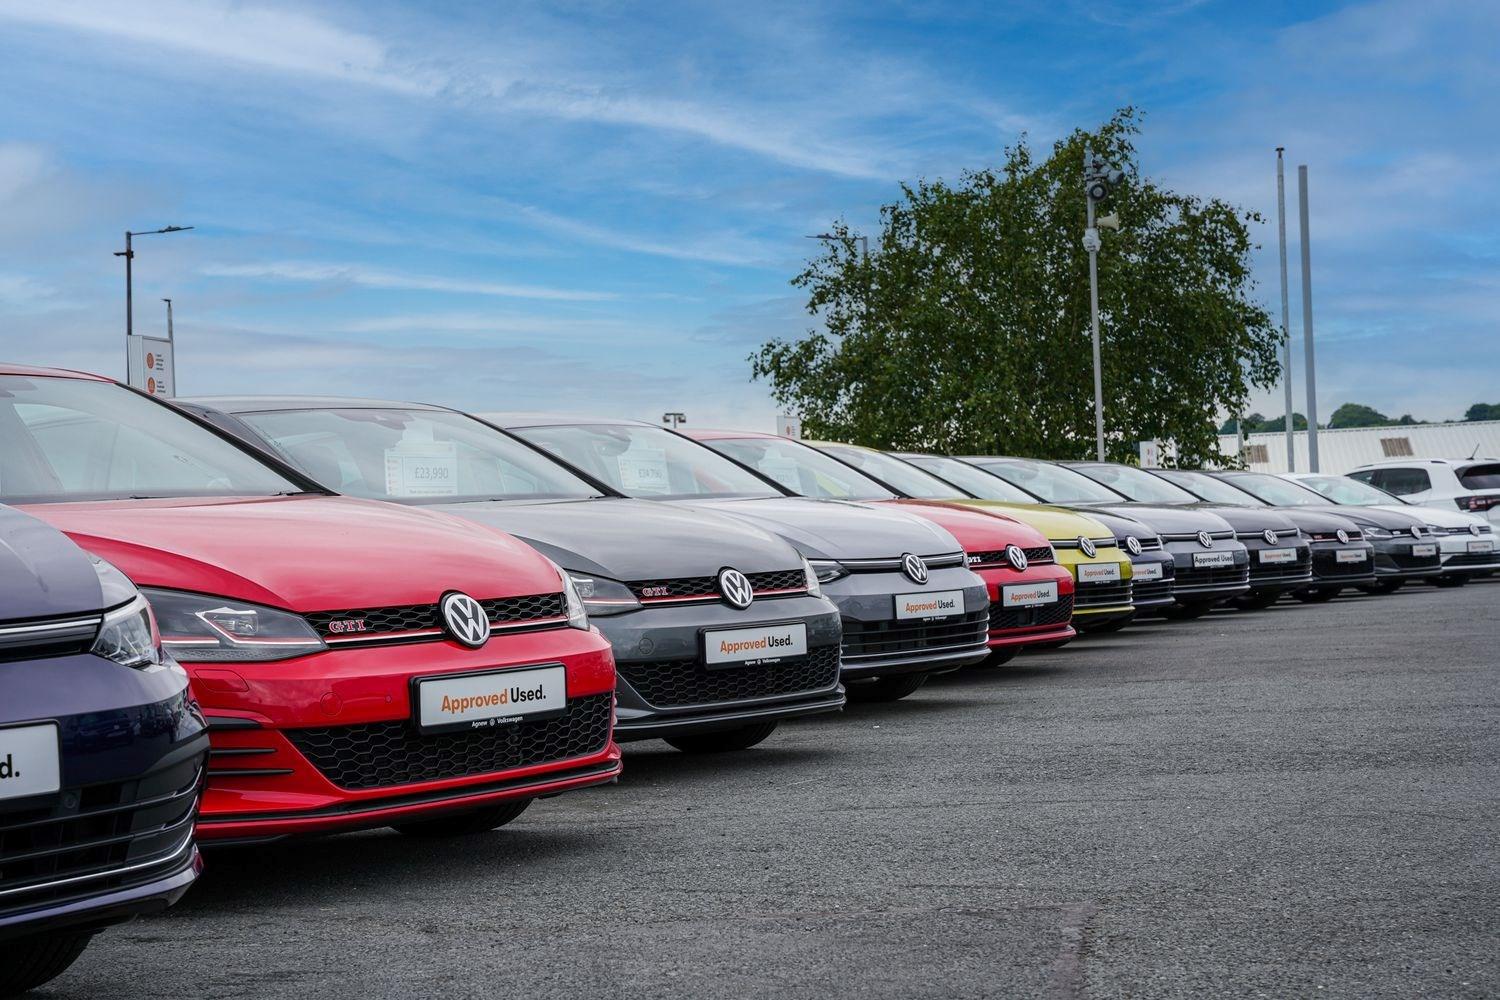 The latest range of Volkswagen Approved Used Golfs lined up in a row